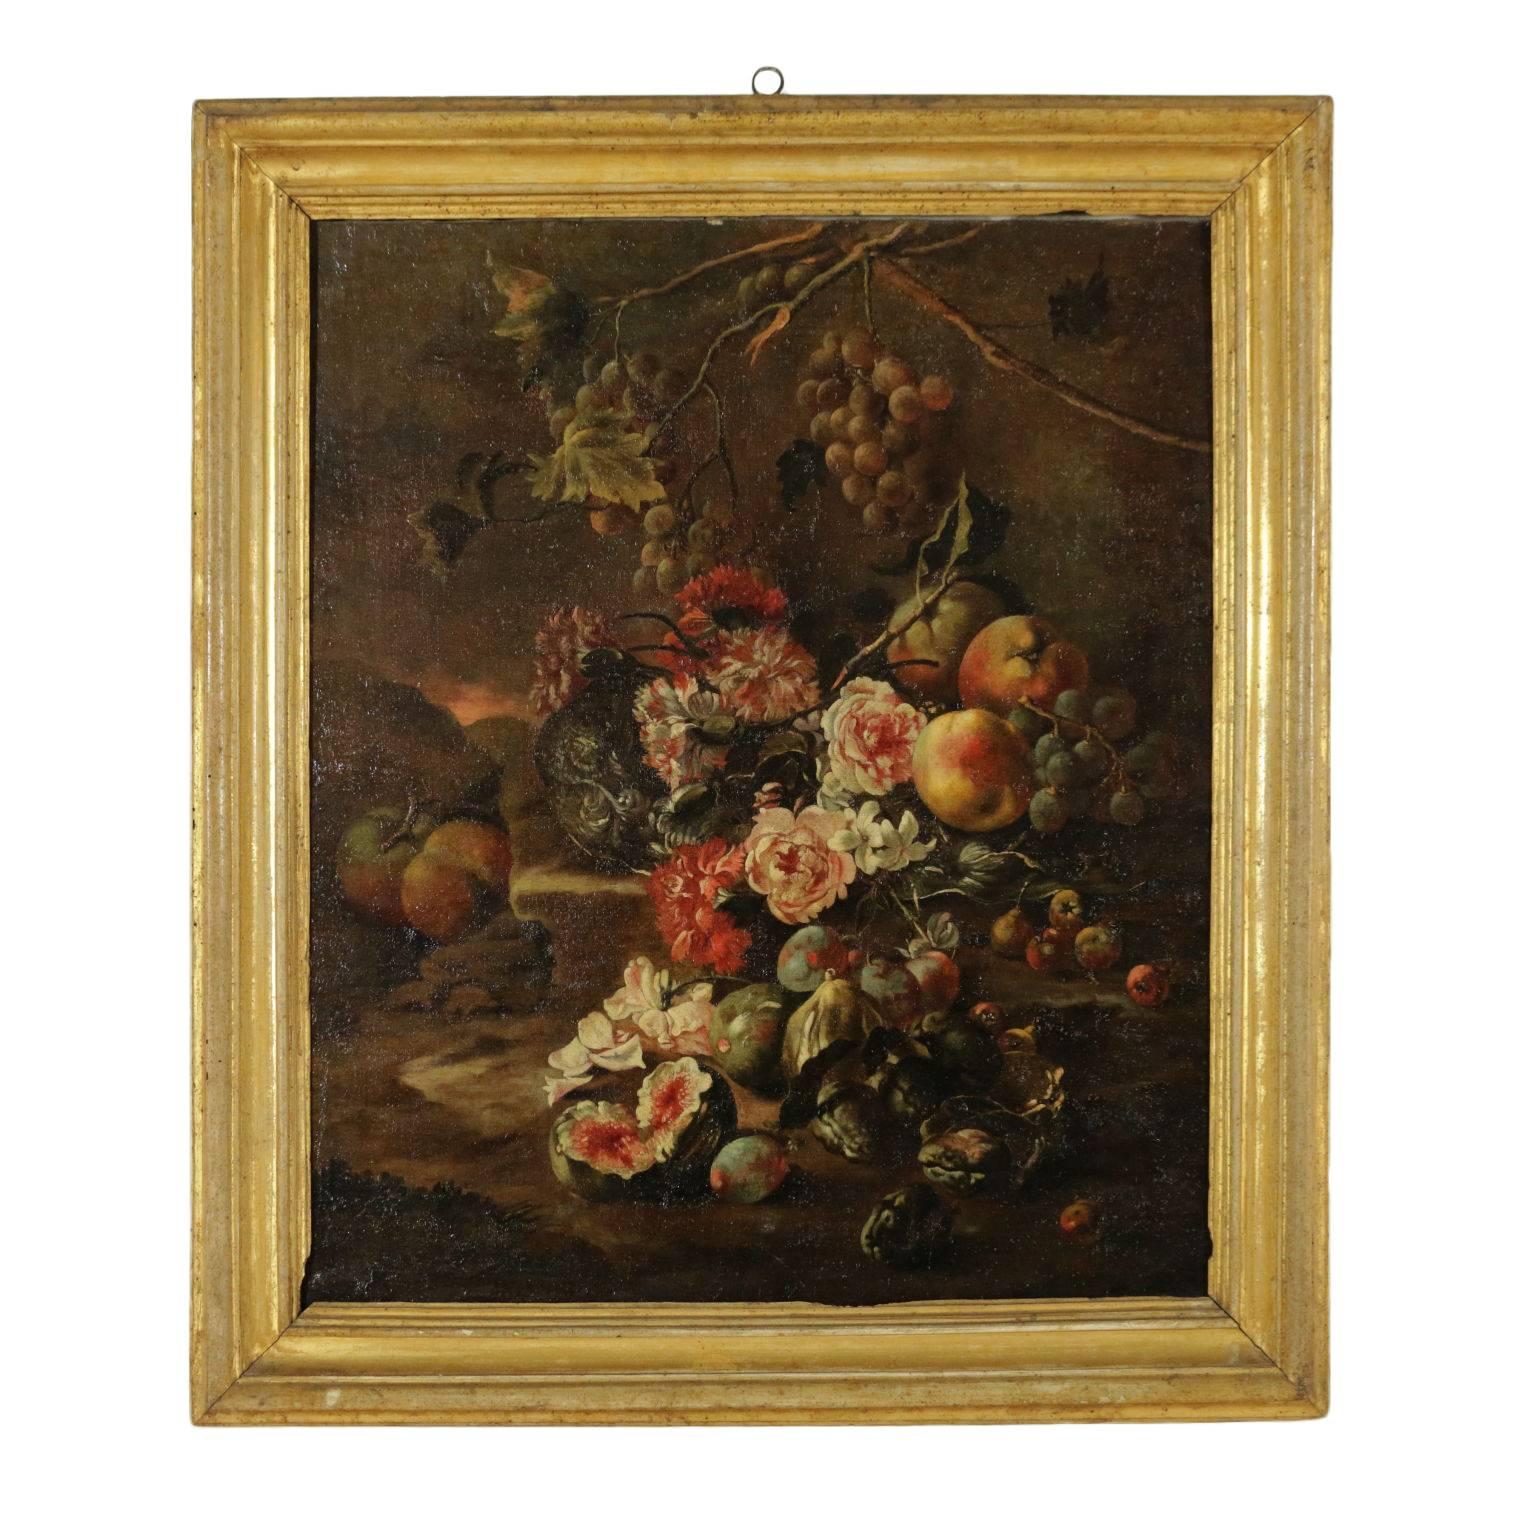 Unknown Still-Life Painting - Still Life with Flowers and Fruit Oil on Canvas Italian School 18th Century